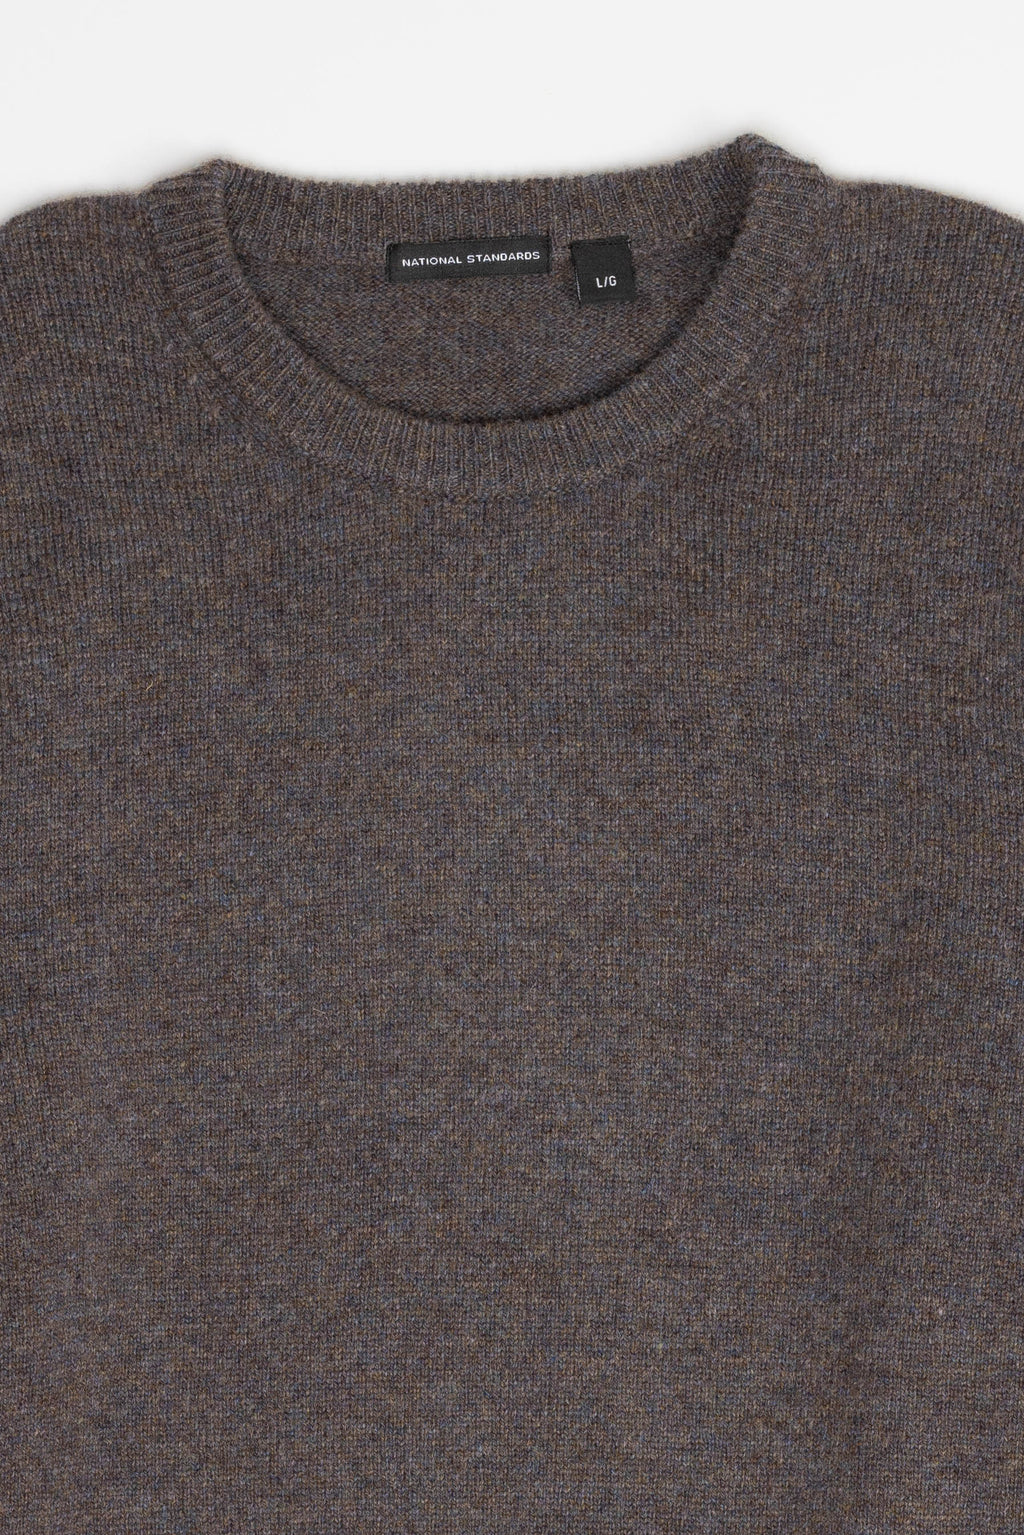 NS3018-20 New Wool Crew Neck in Melange Fossil 5